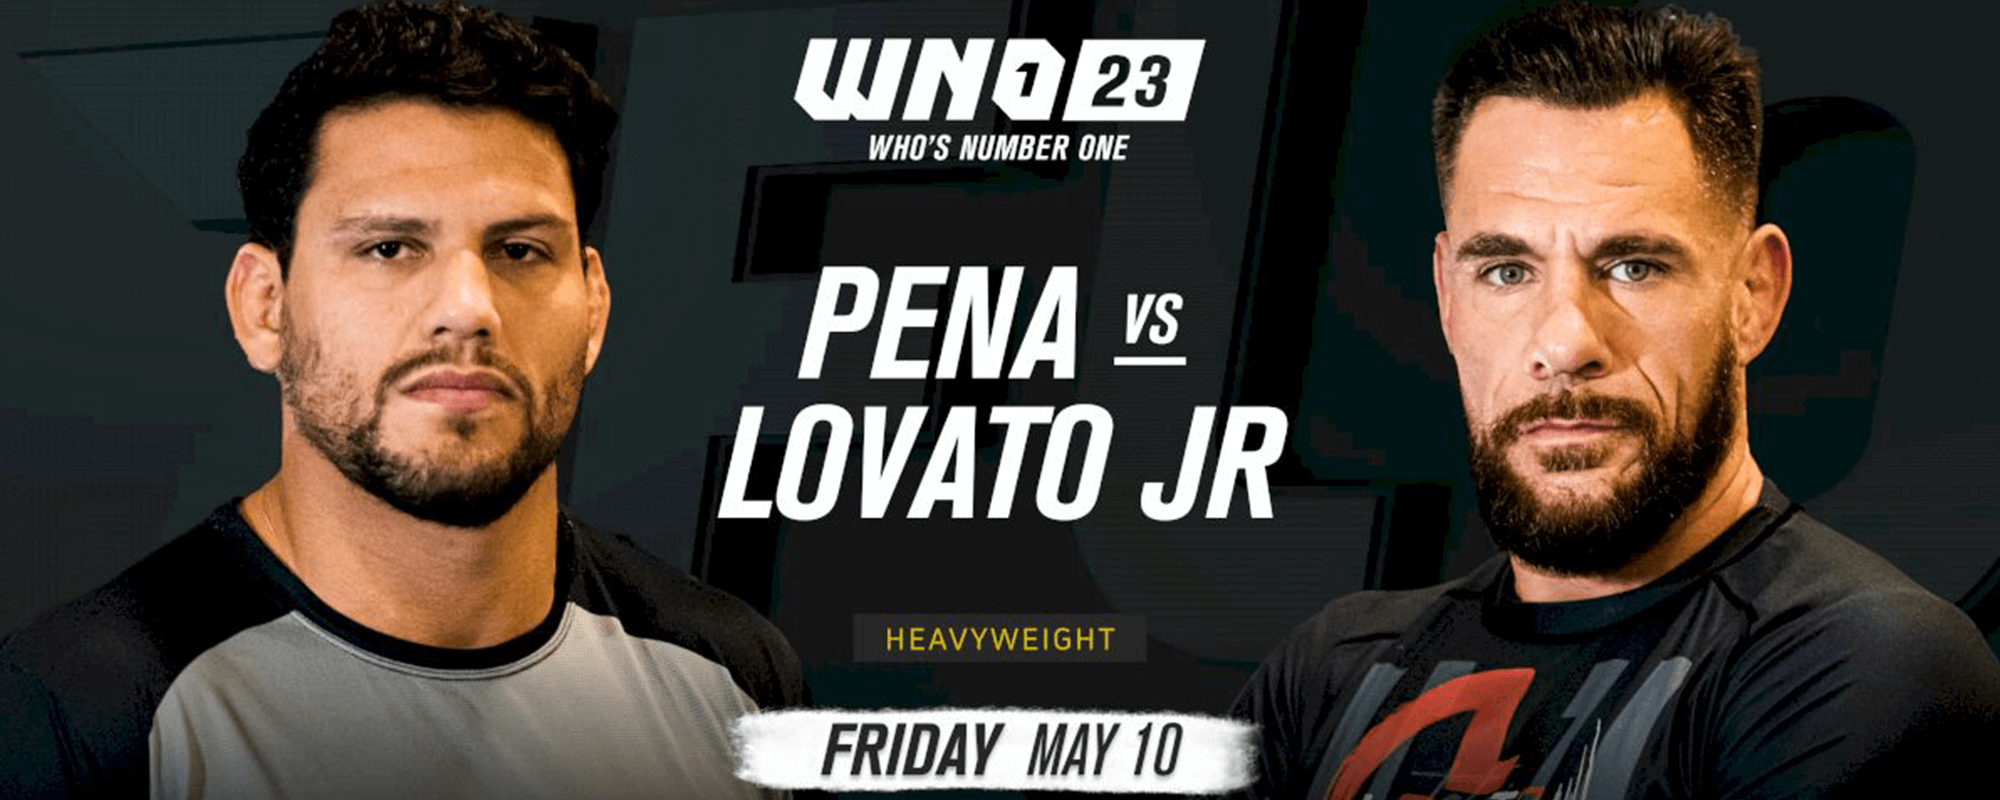 Felipe Pena and Rafael Lovato Jr face  Off at Who’s Number One 23